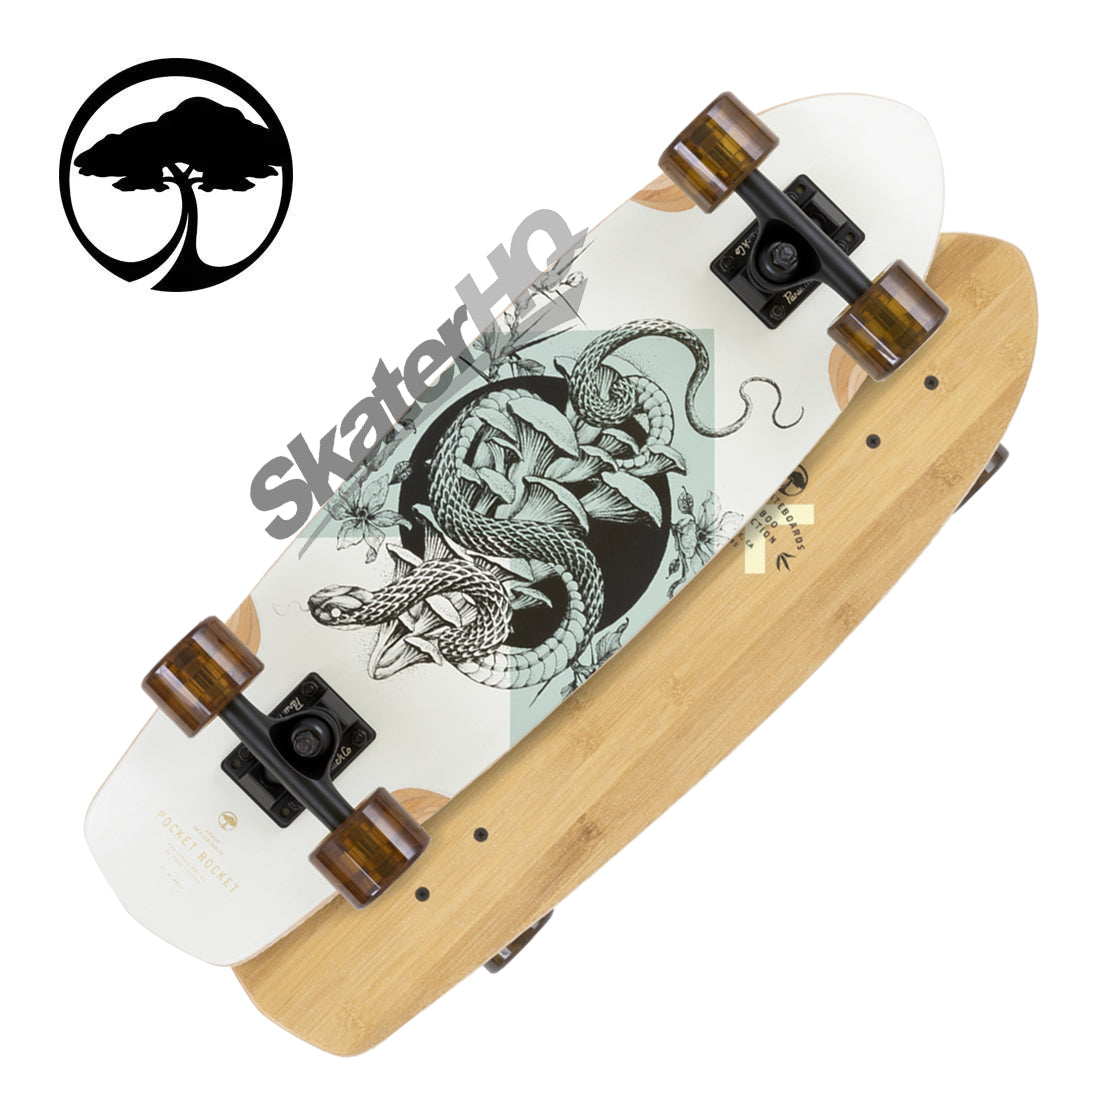 Arbor Pocket Rocket 27 Bamboo Complete - White/Teal Skateboard Compl Cruisers